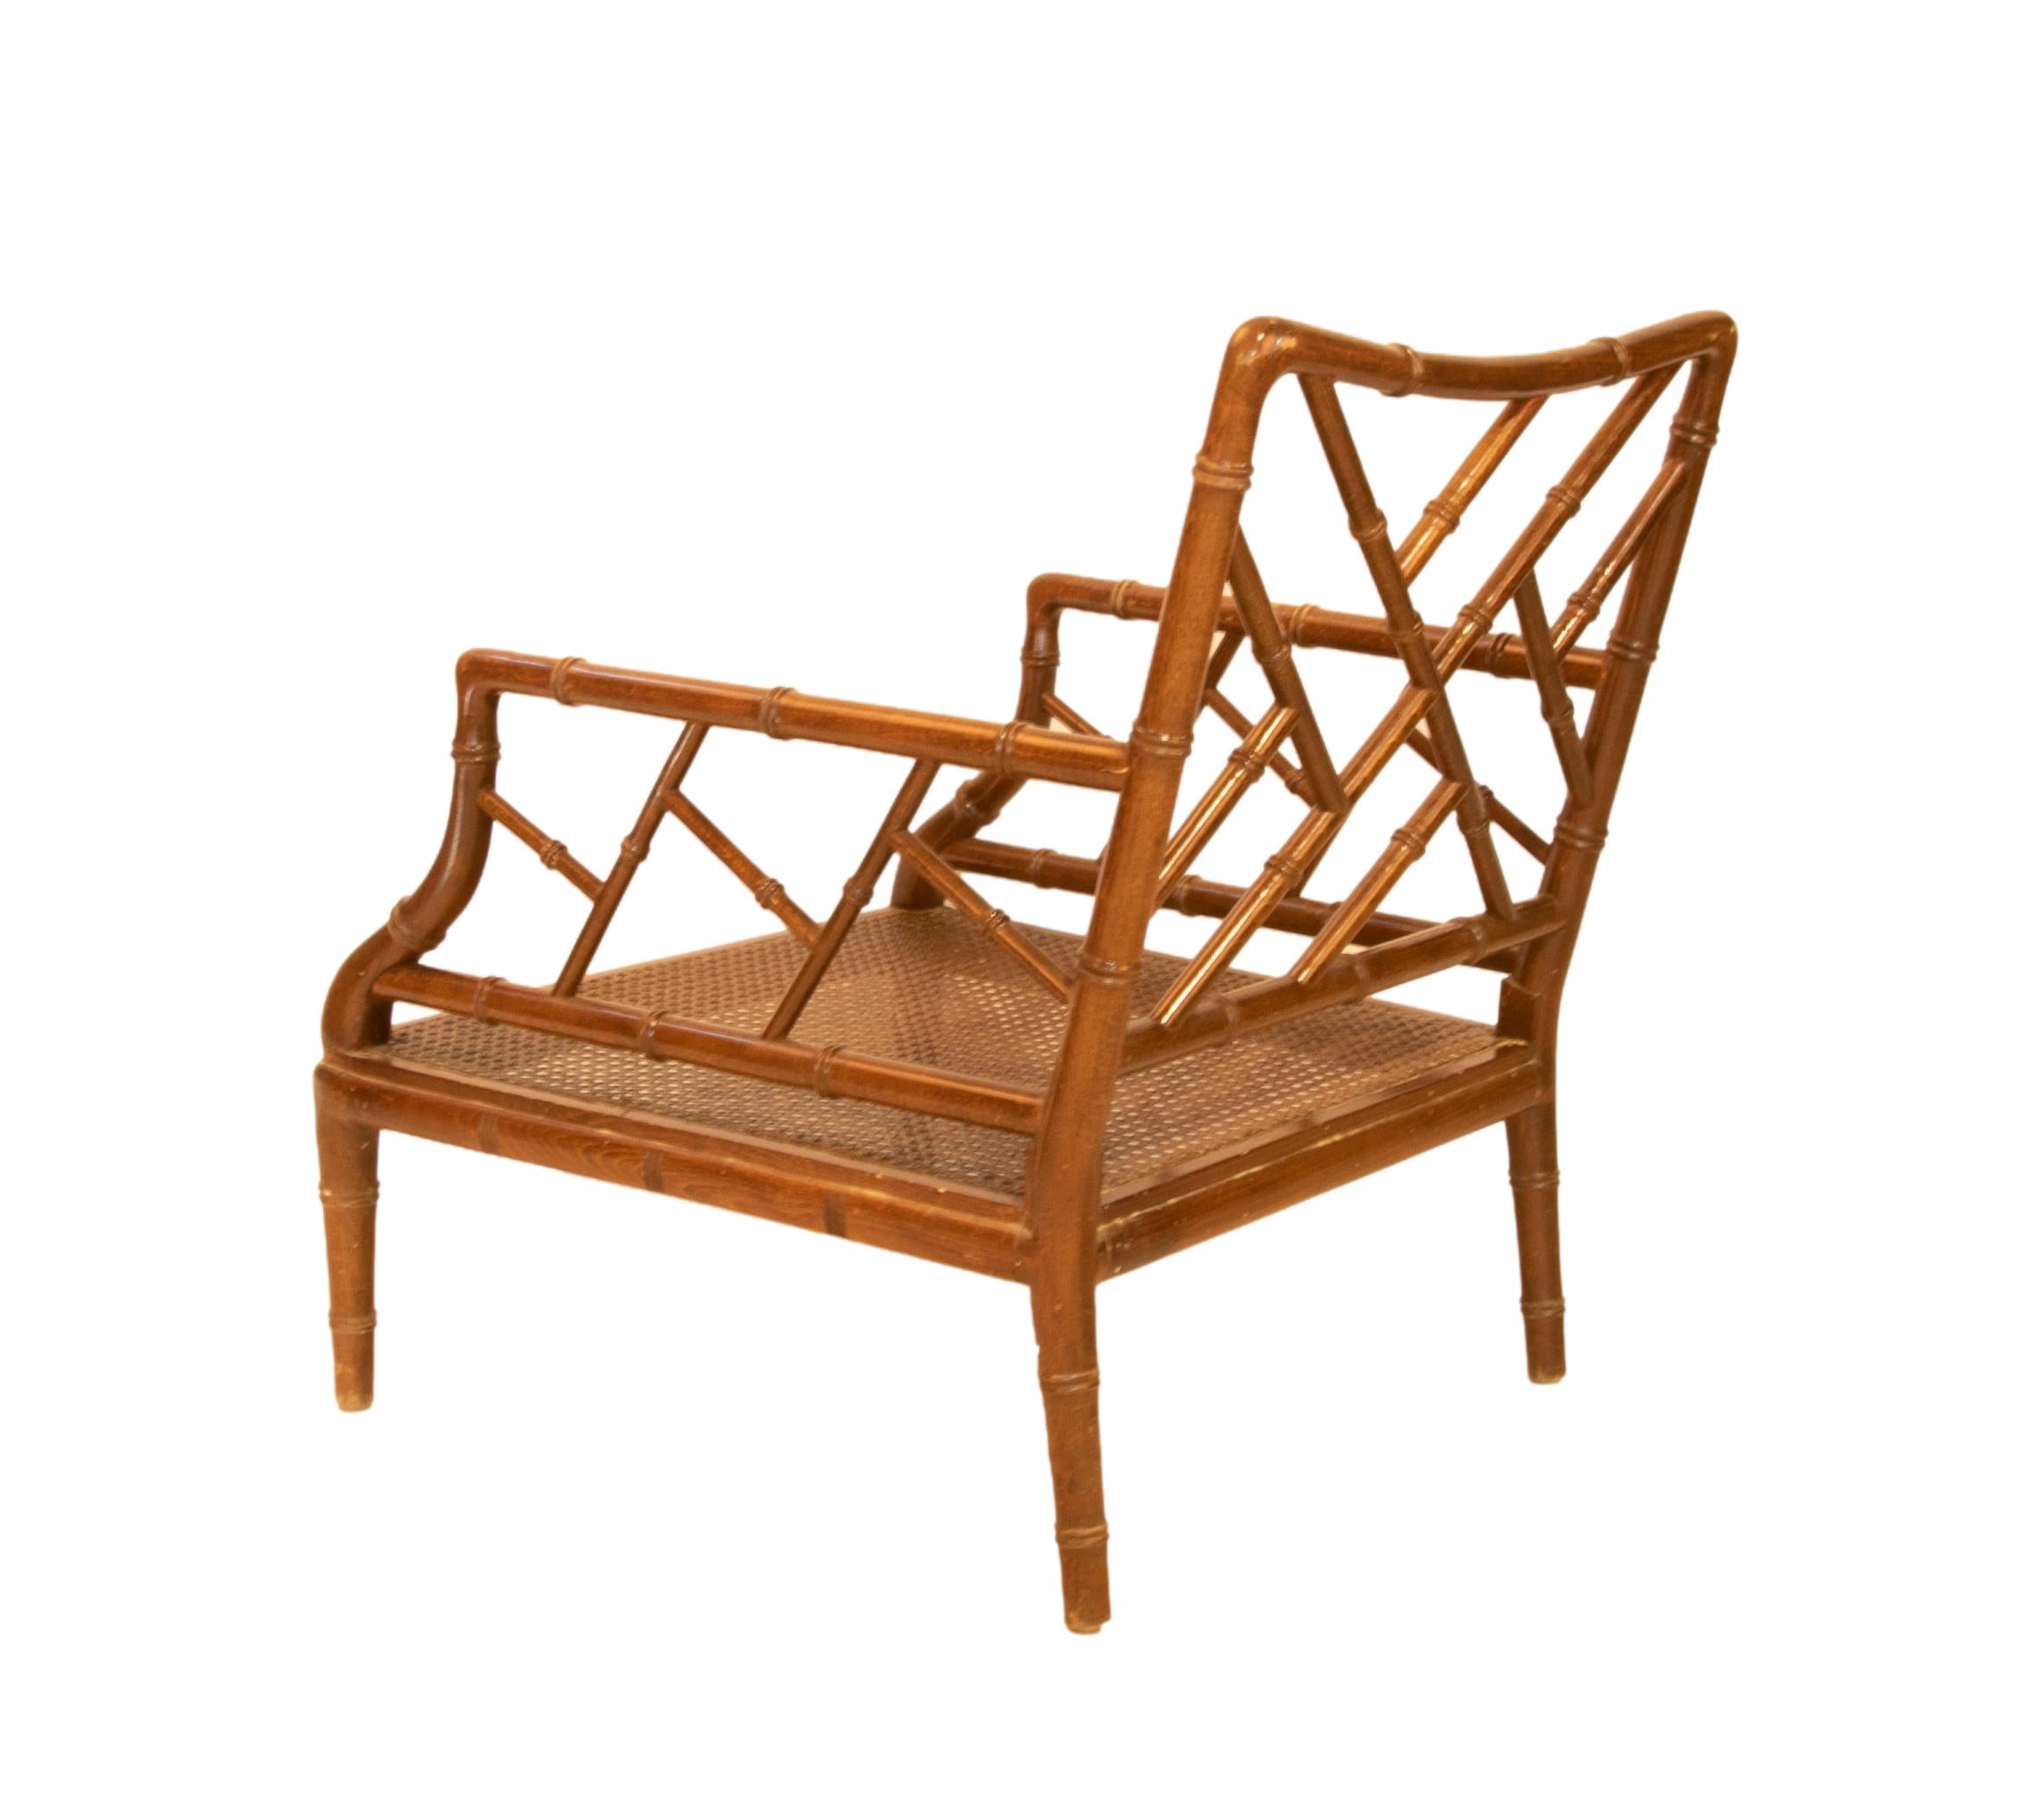 1980s English Wooden Armchair Imitating Bamboo  For Sale 5